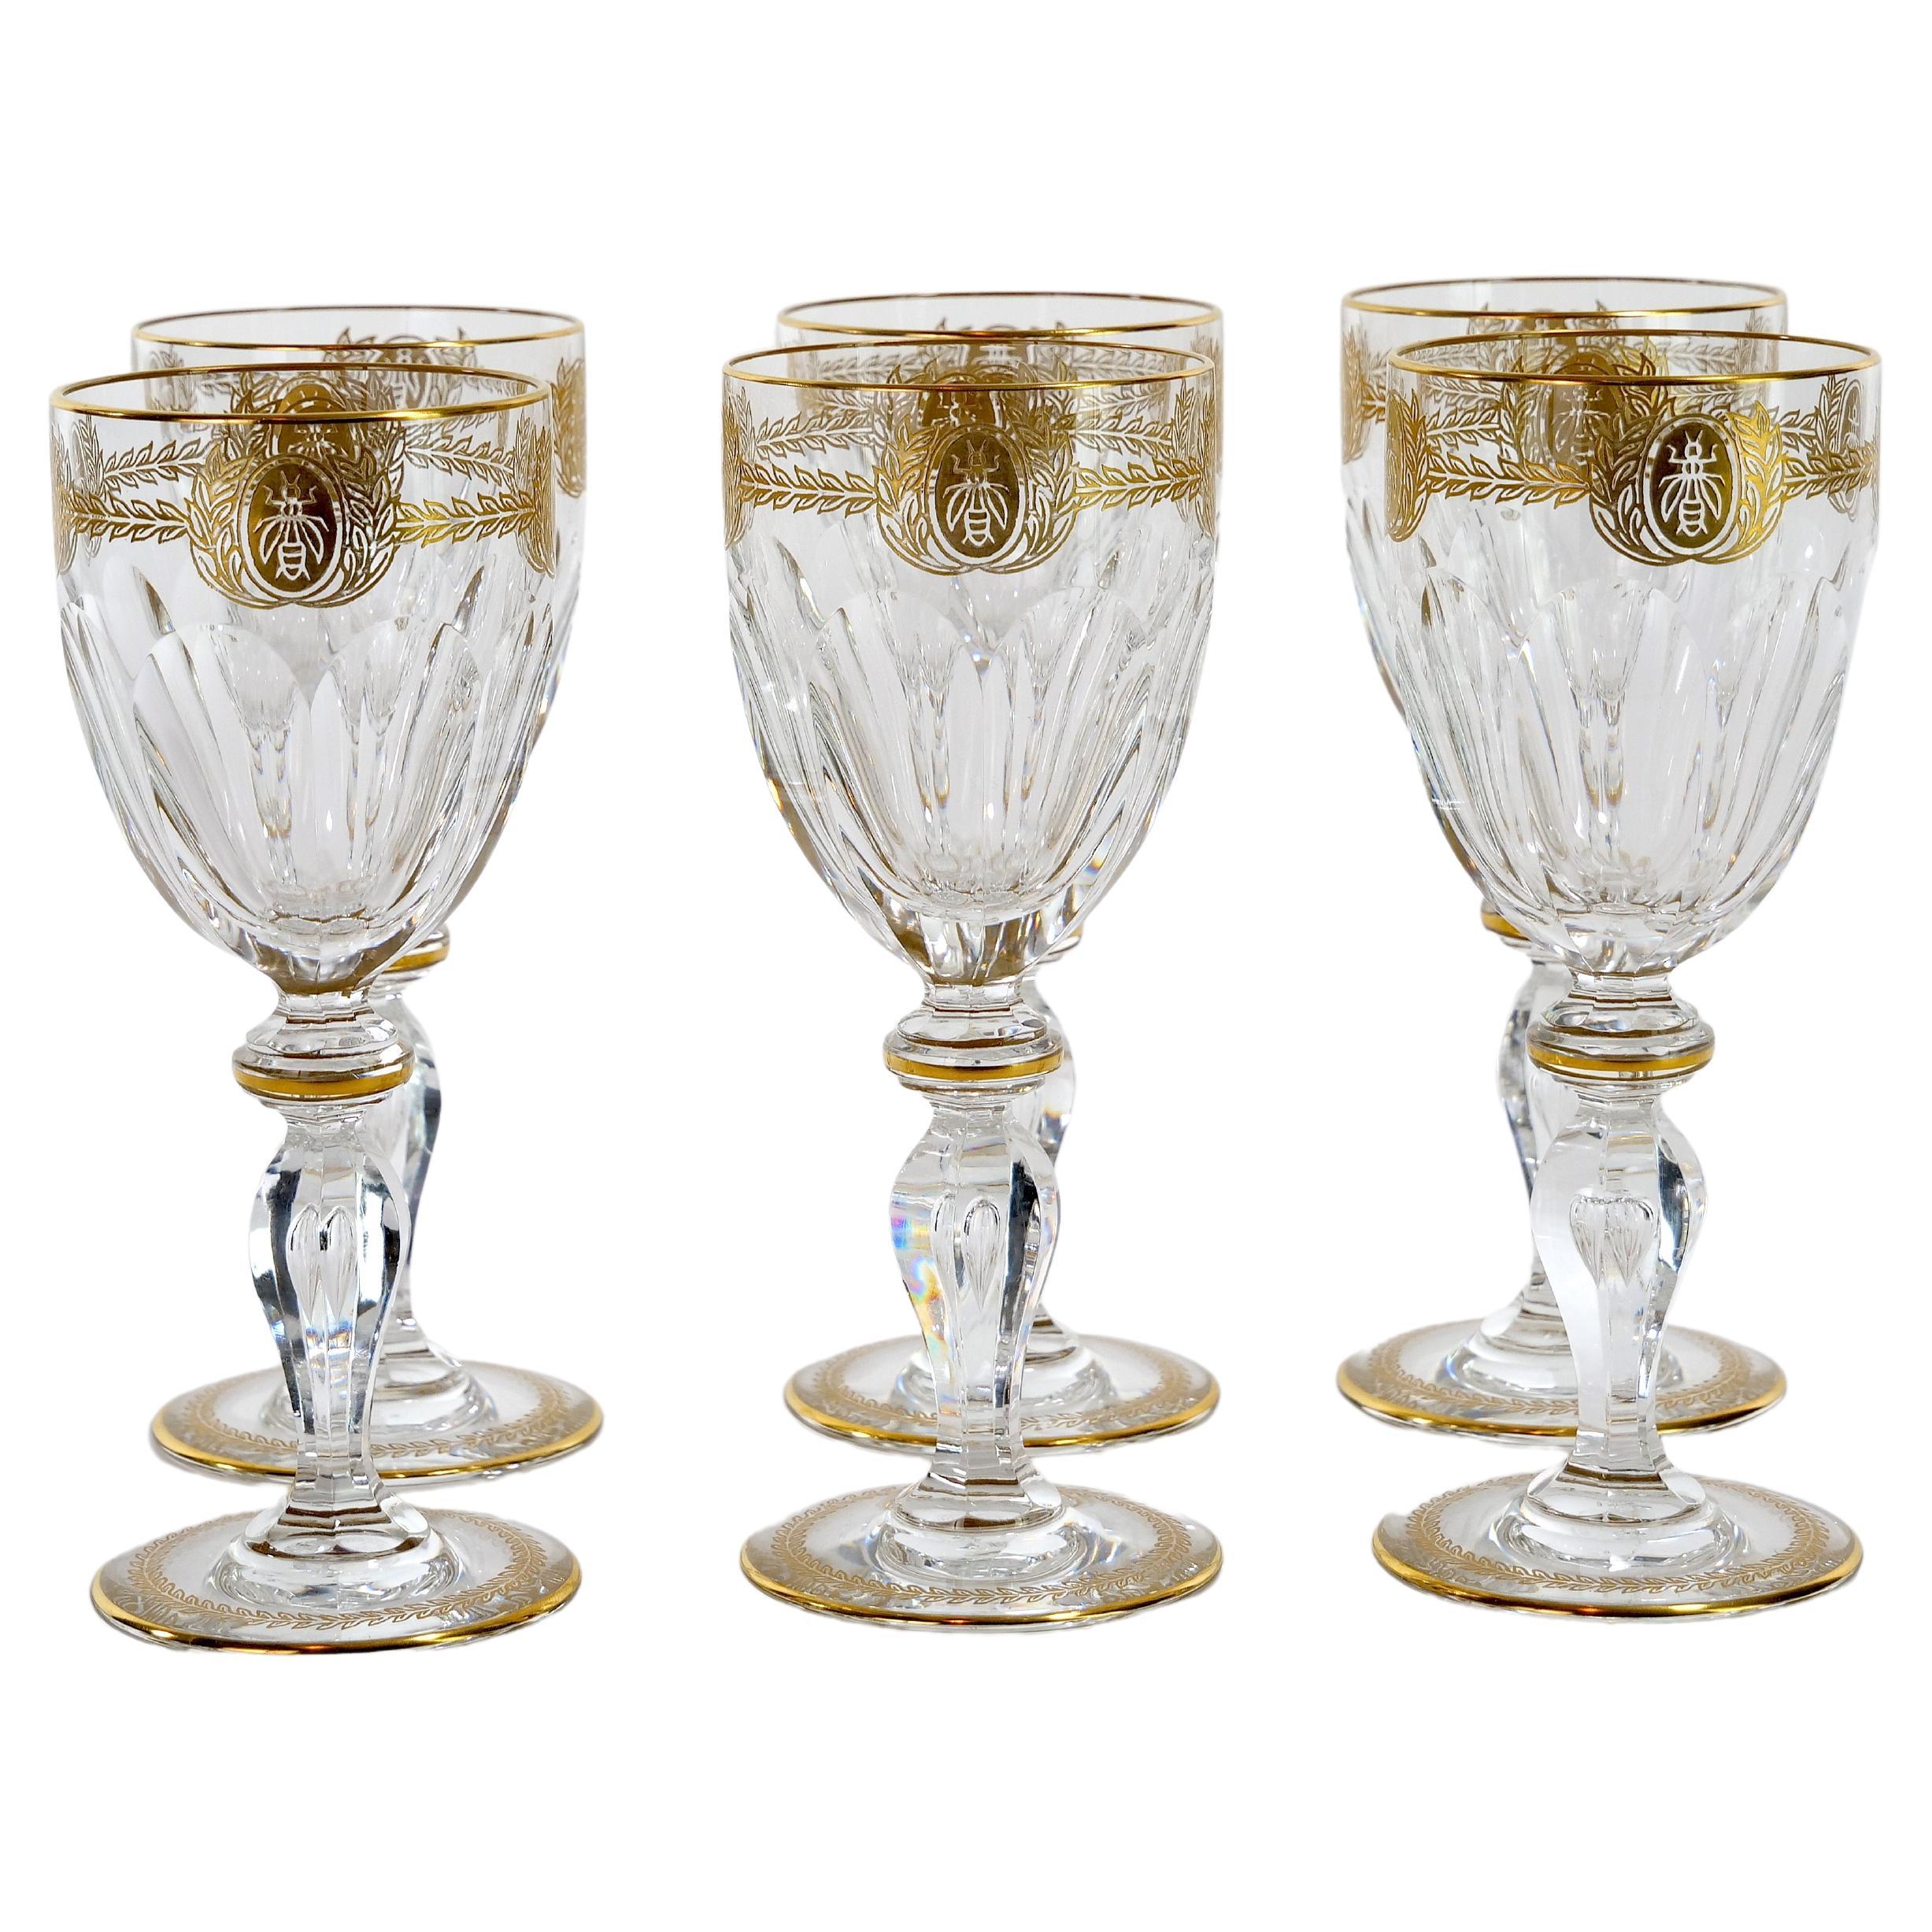 Richly hand cut and mouth blown with hand gilt gold bees design top details and stem garland wreath design barware and tableware wine glass service for 6 people. Each glass features a deep cuts that allow the light to retract and shine to a